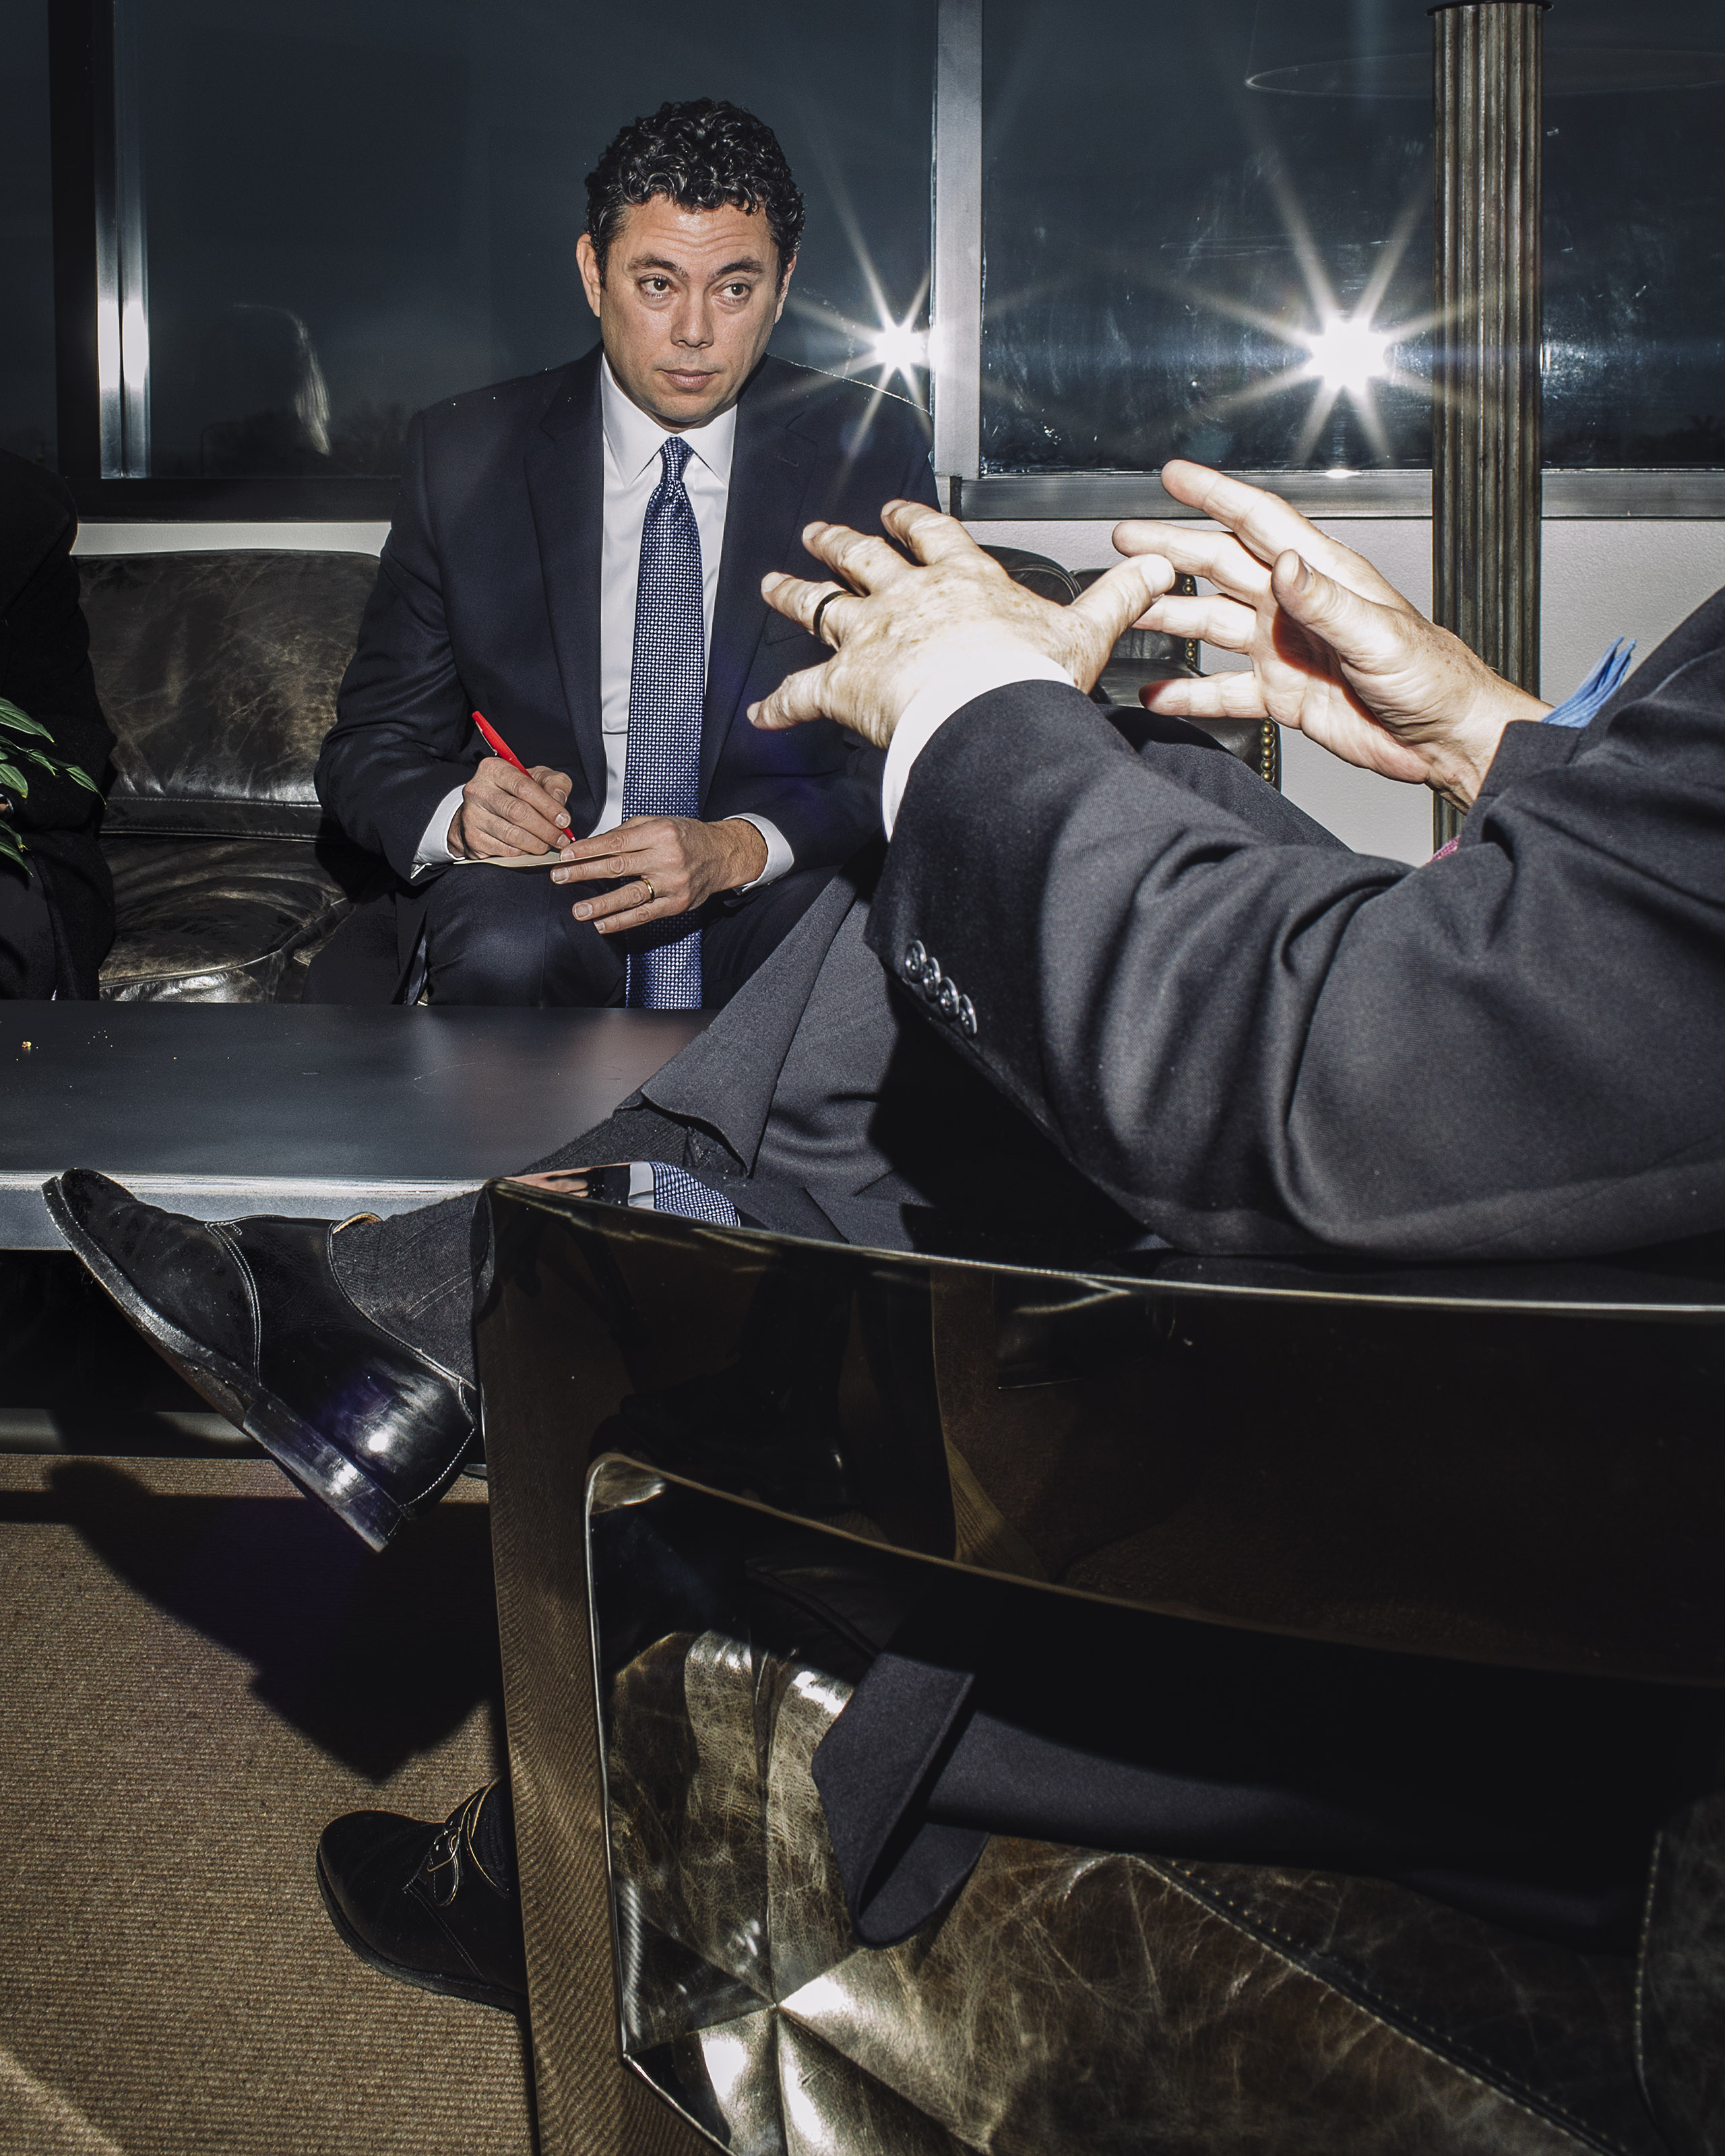 Chaffetz visits a major donor from a Utah medical-device firm to discuss regulations (Photographs by Michael Friberg for TIME)